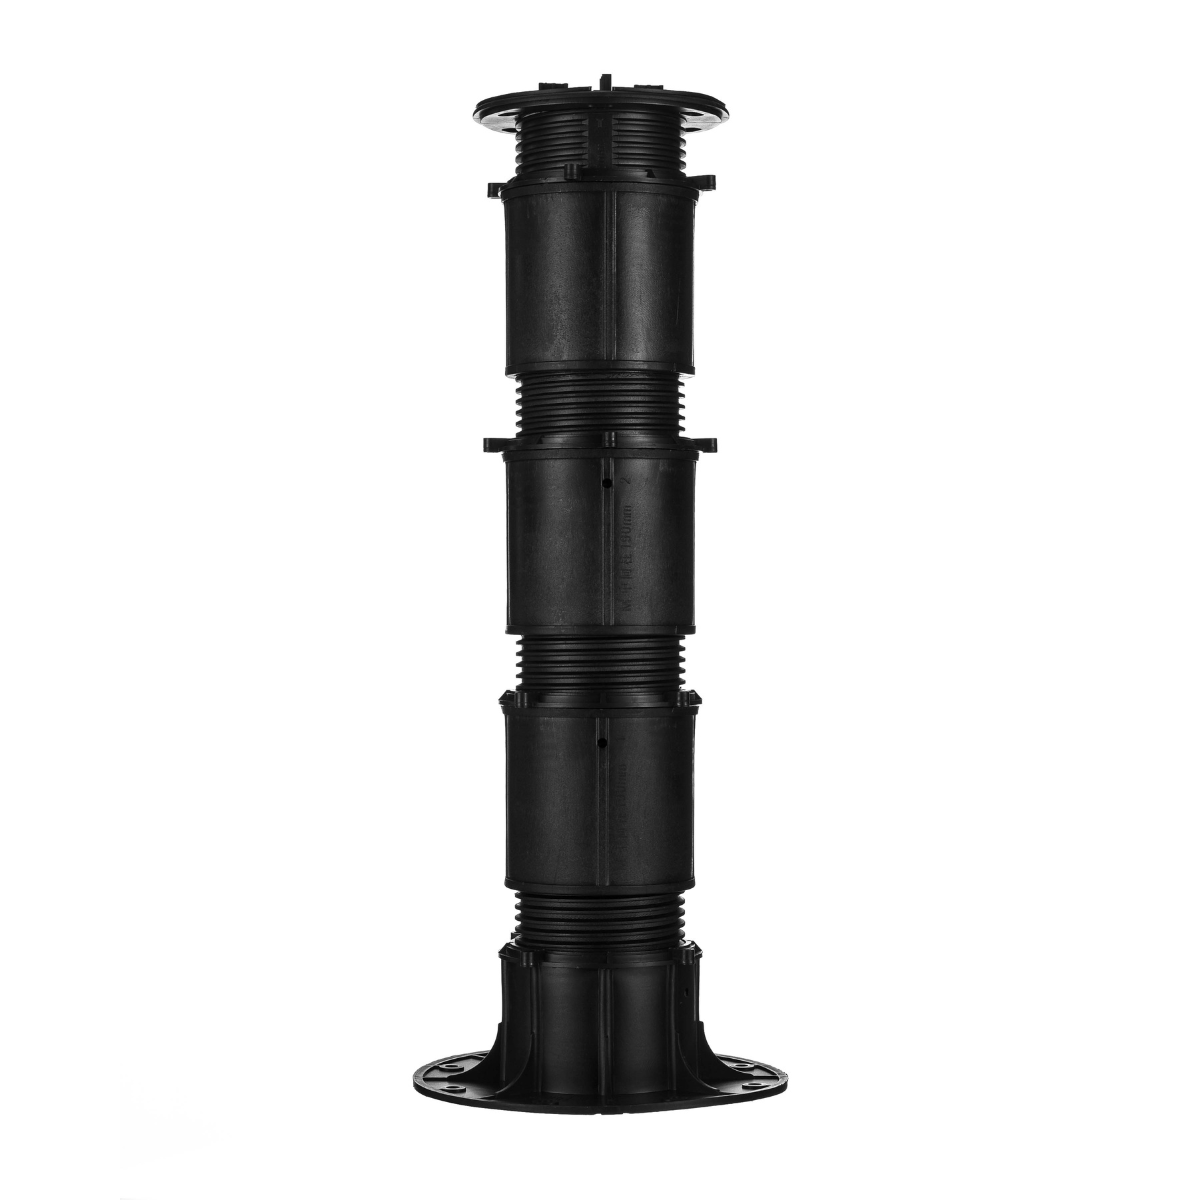 Water feature support Height adjustable Stone tile support Raised floor Fountain square Adjustable universal support